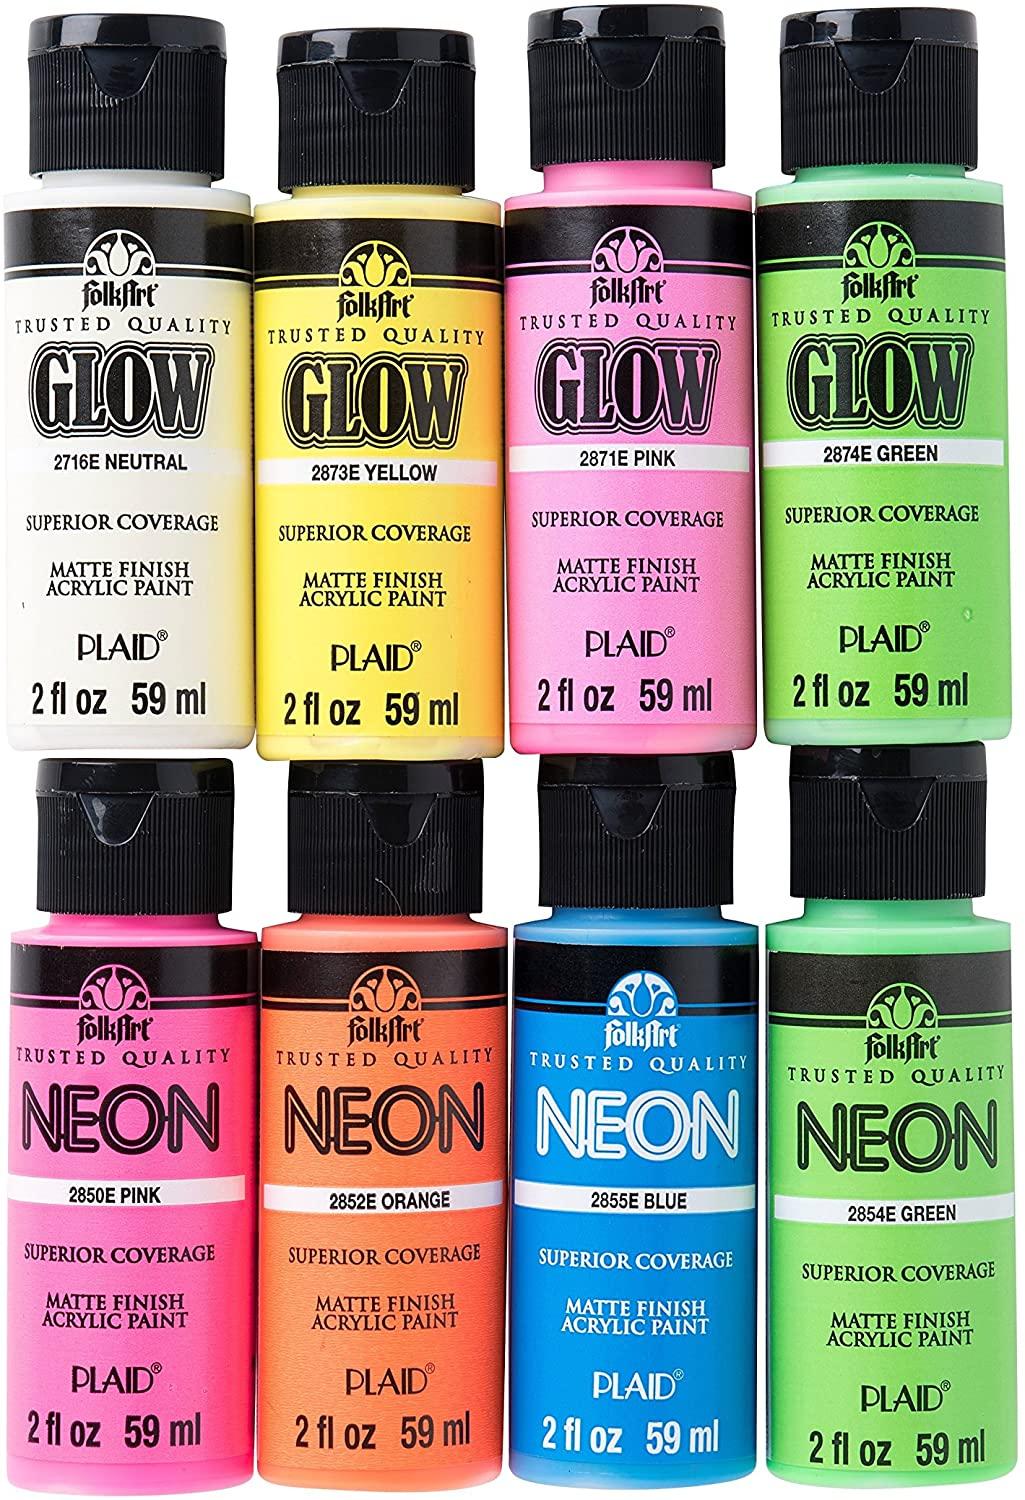 The Best Glow in the Dark Paints for Arts and Crafts